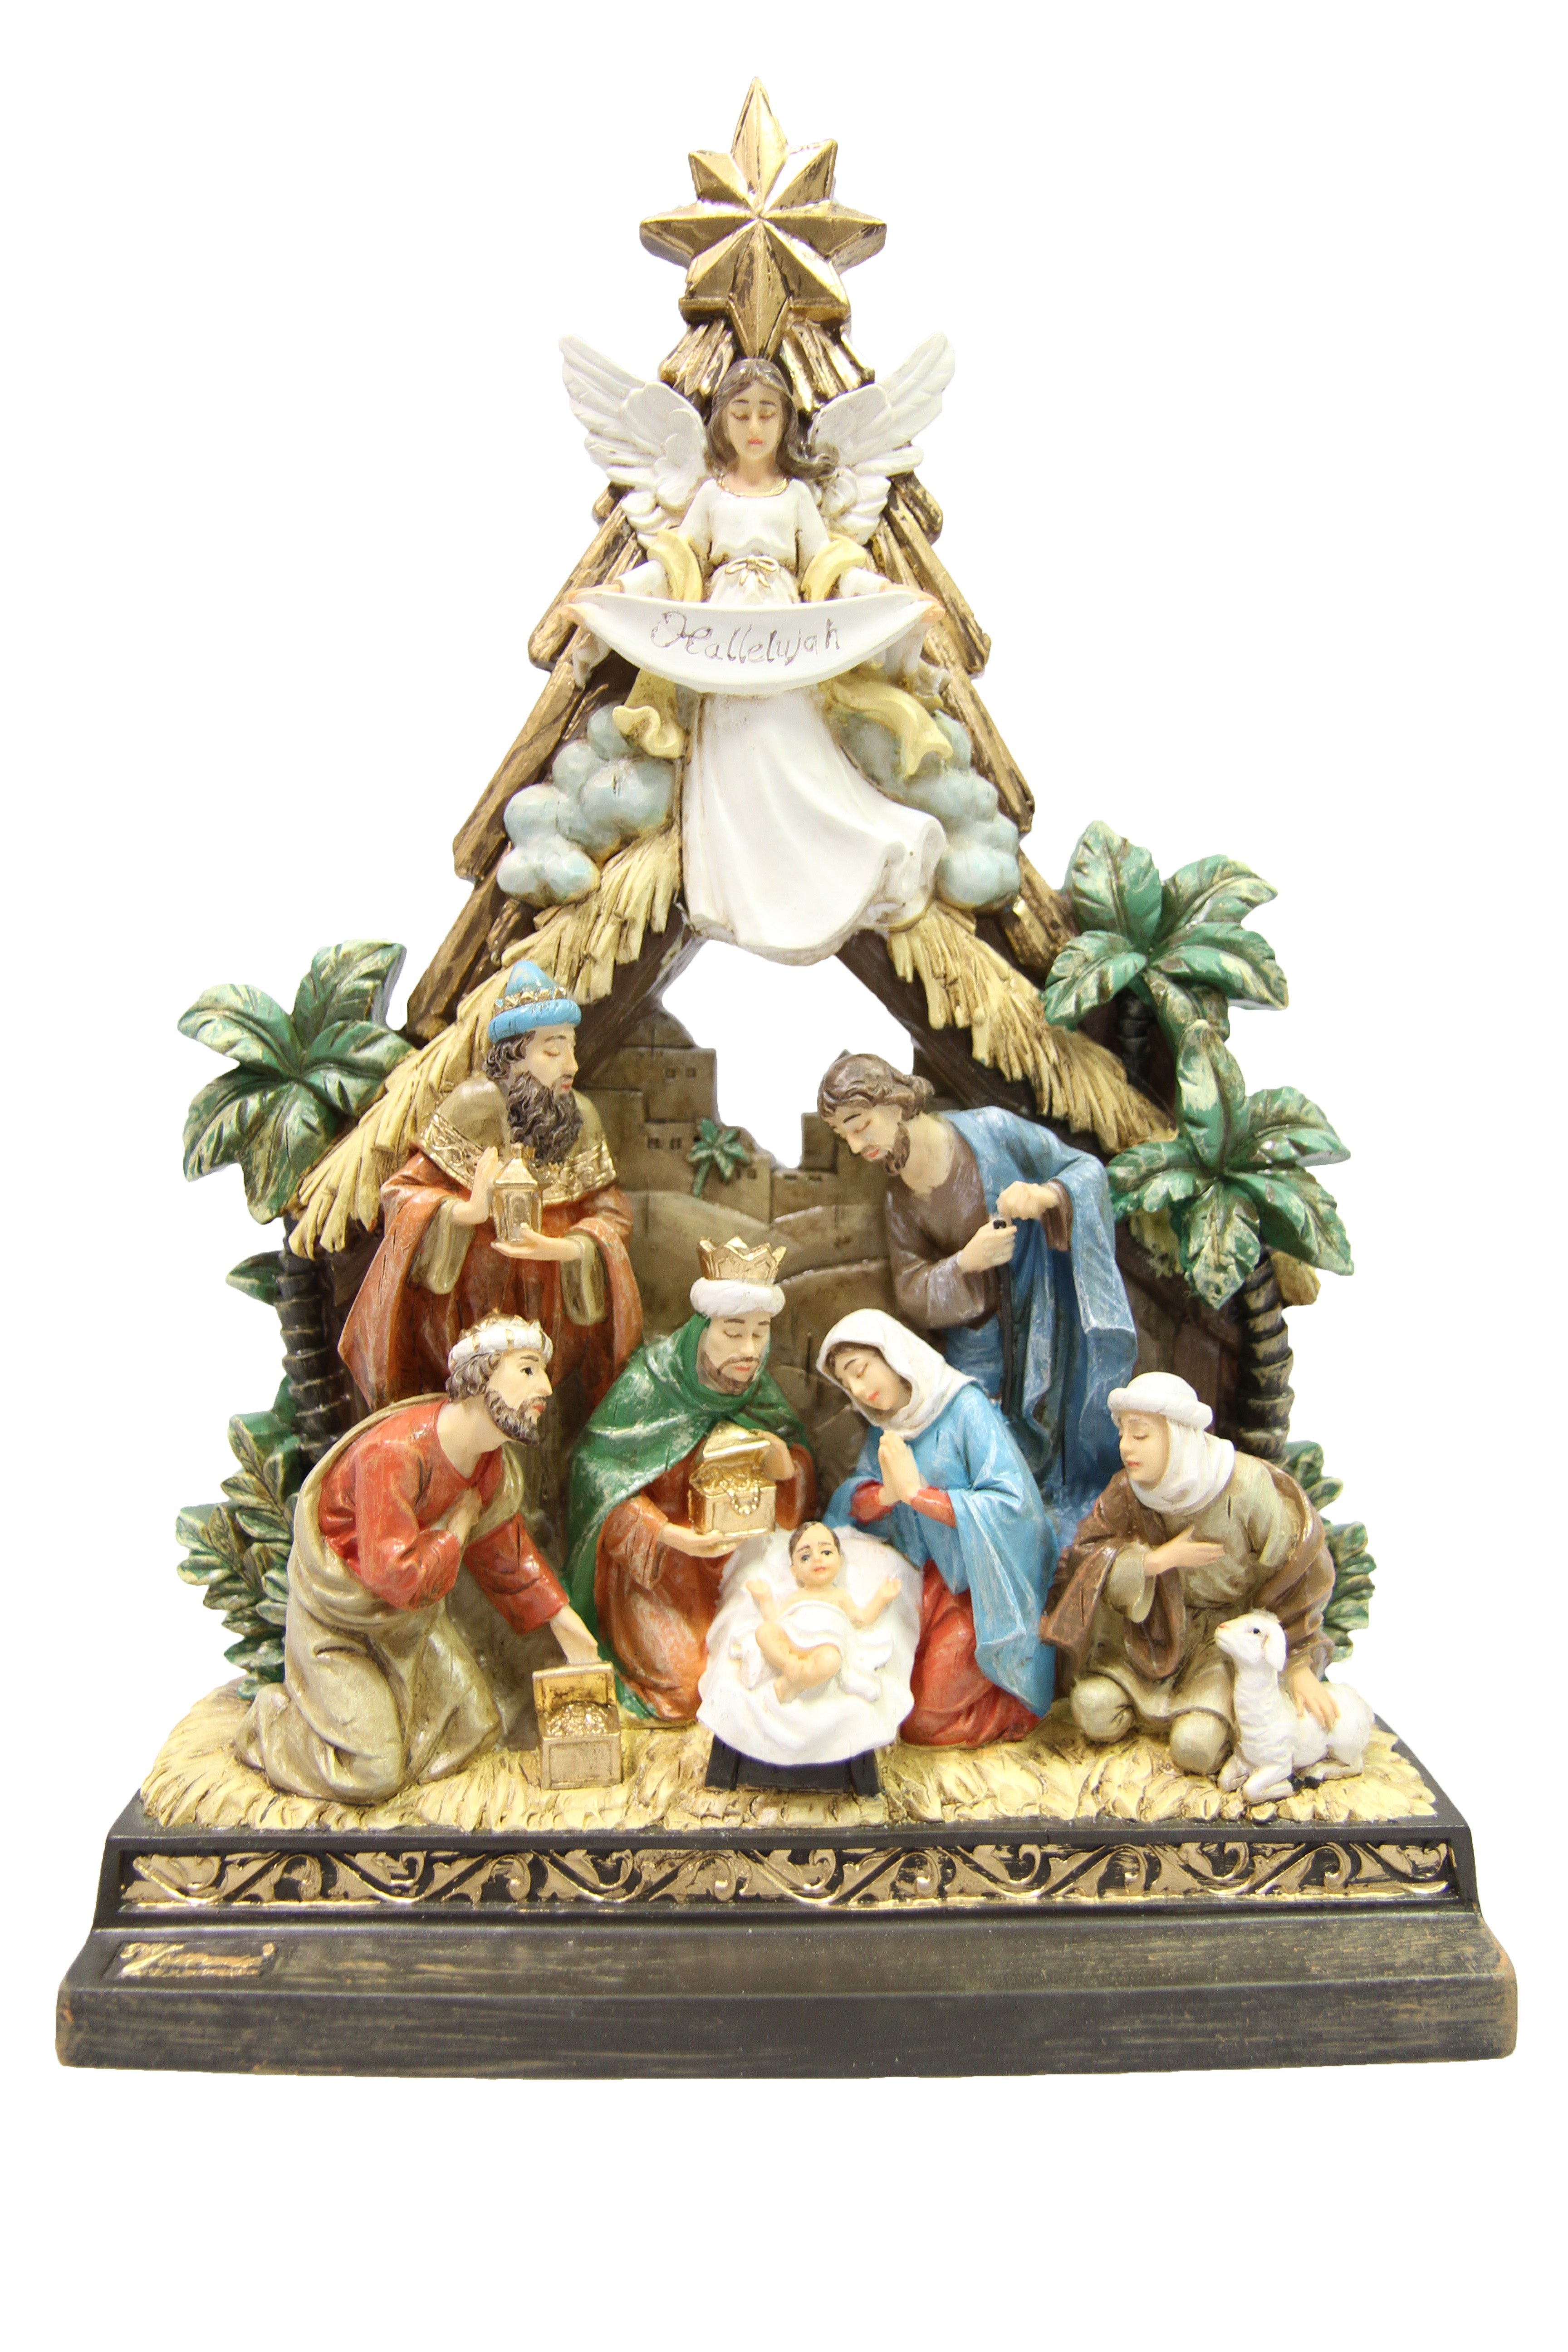 11 inch Nativity Set Scene with Manger Baby Jesus Joseph Mary Three Kings Catholic Religious Statue Sculpture Figurine Christmas Vittoria Collection Made in Italy